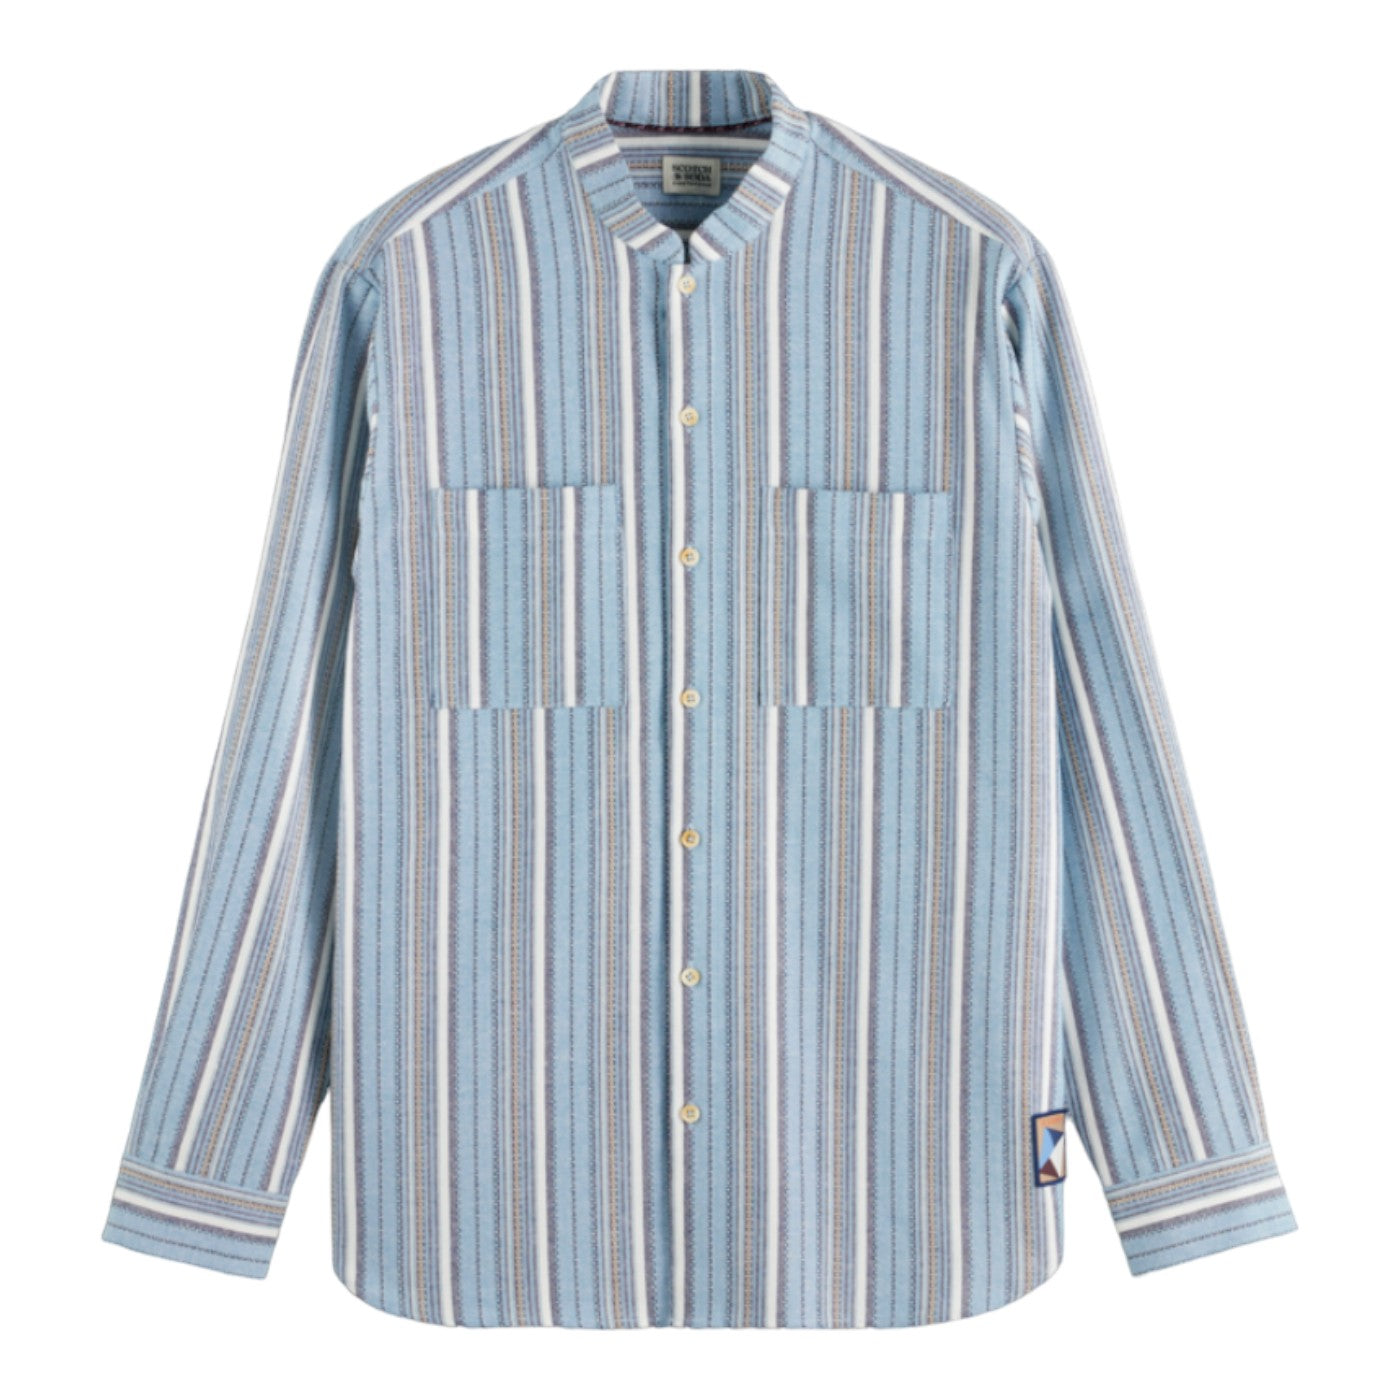 Blue striped long sleeve button down with two front pockets